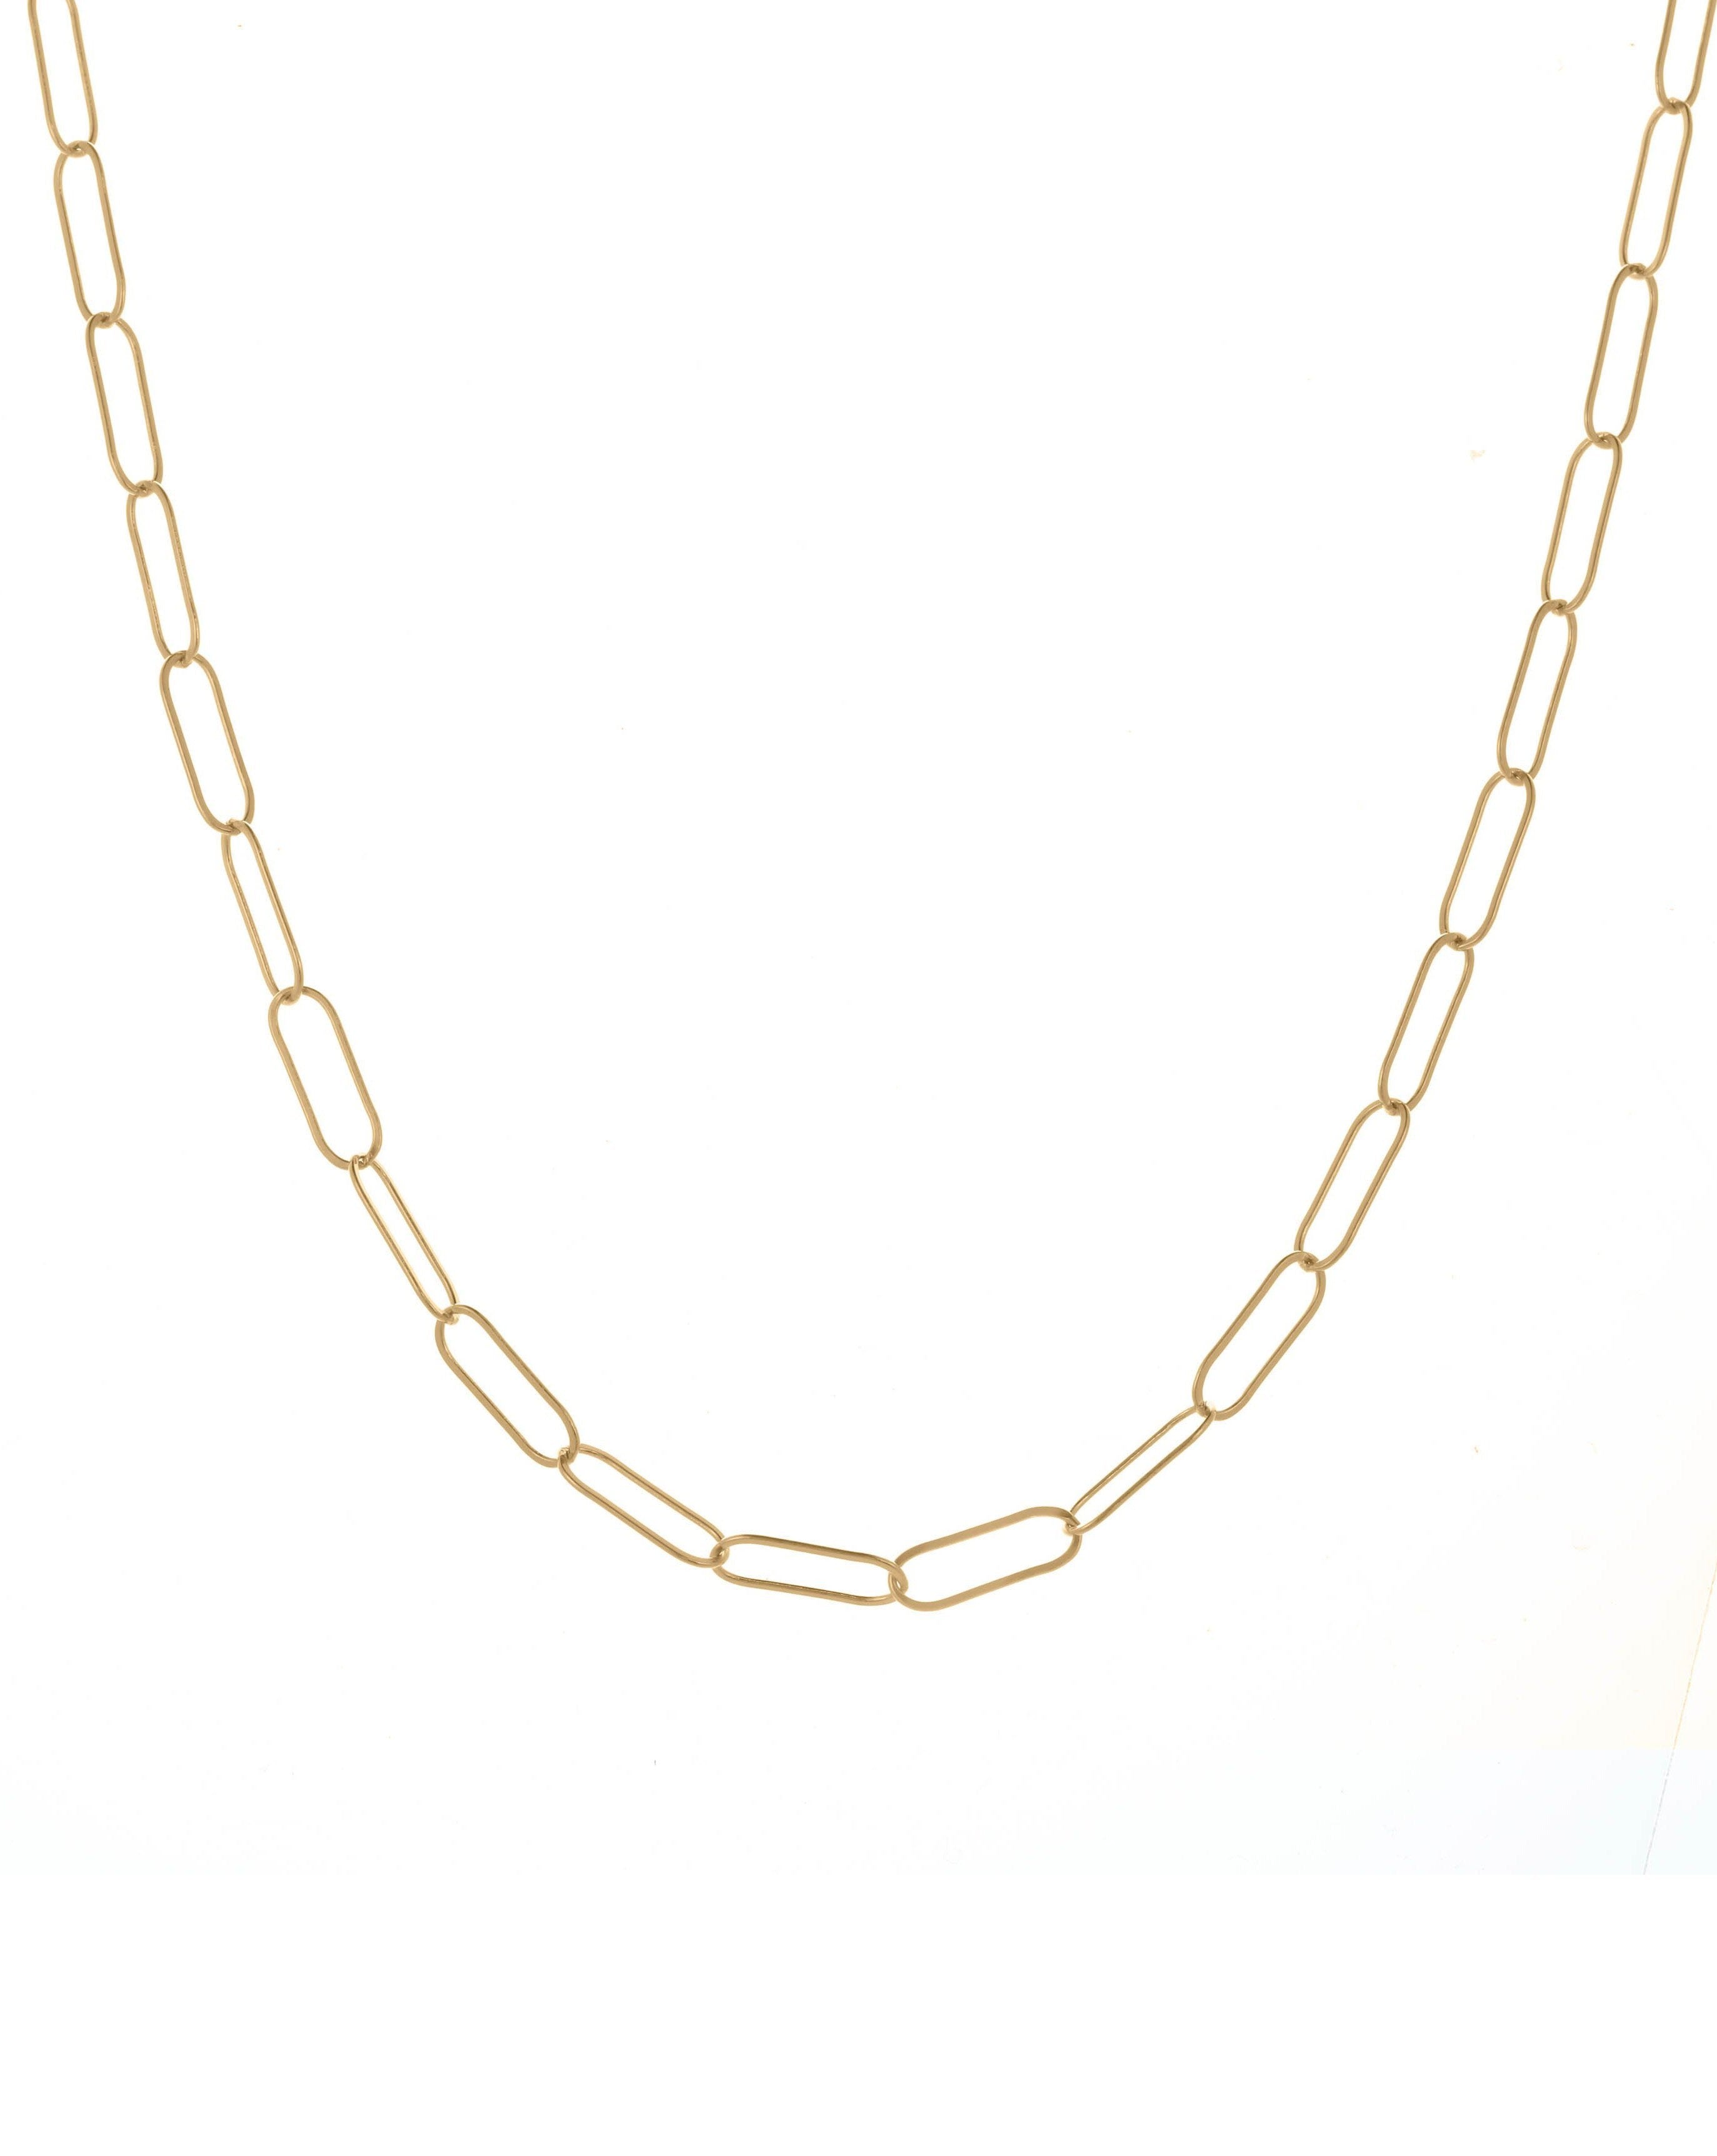 Muse Chain Necklace by KOZAKH. A 14 to 16 inch adjustable length, flat oval link chain necklace, crafted in 14K Gold Filled. 